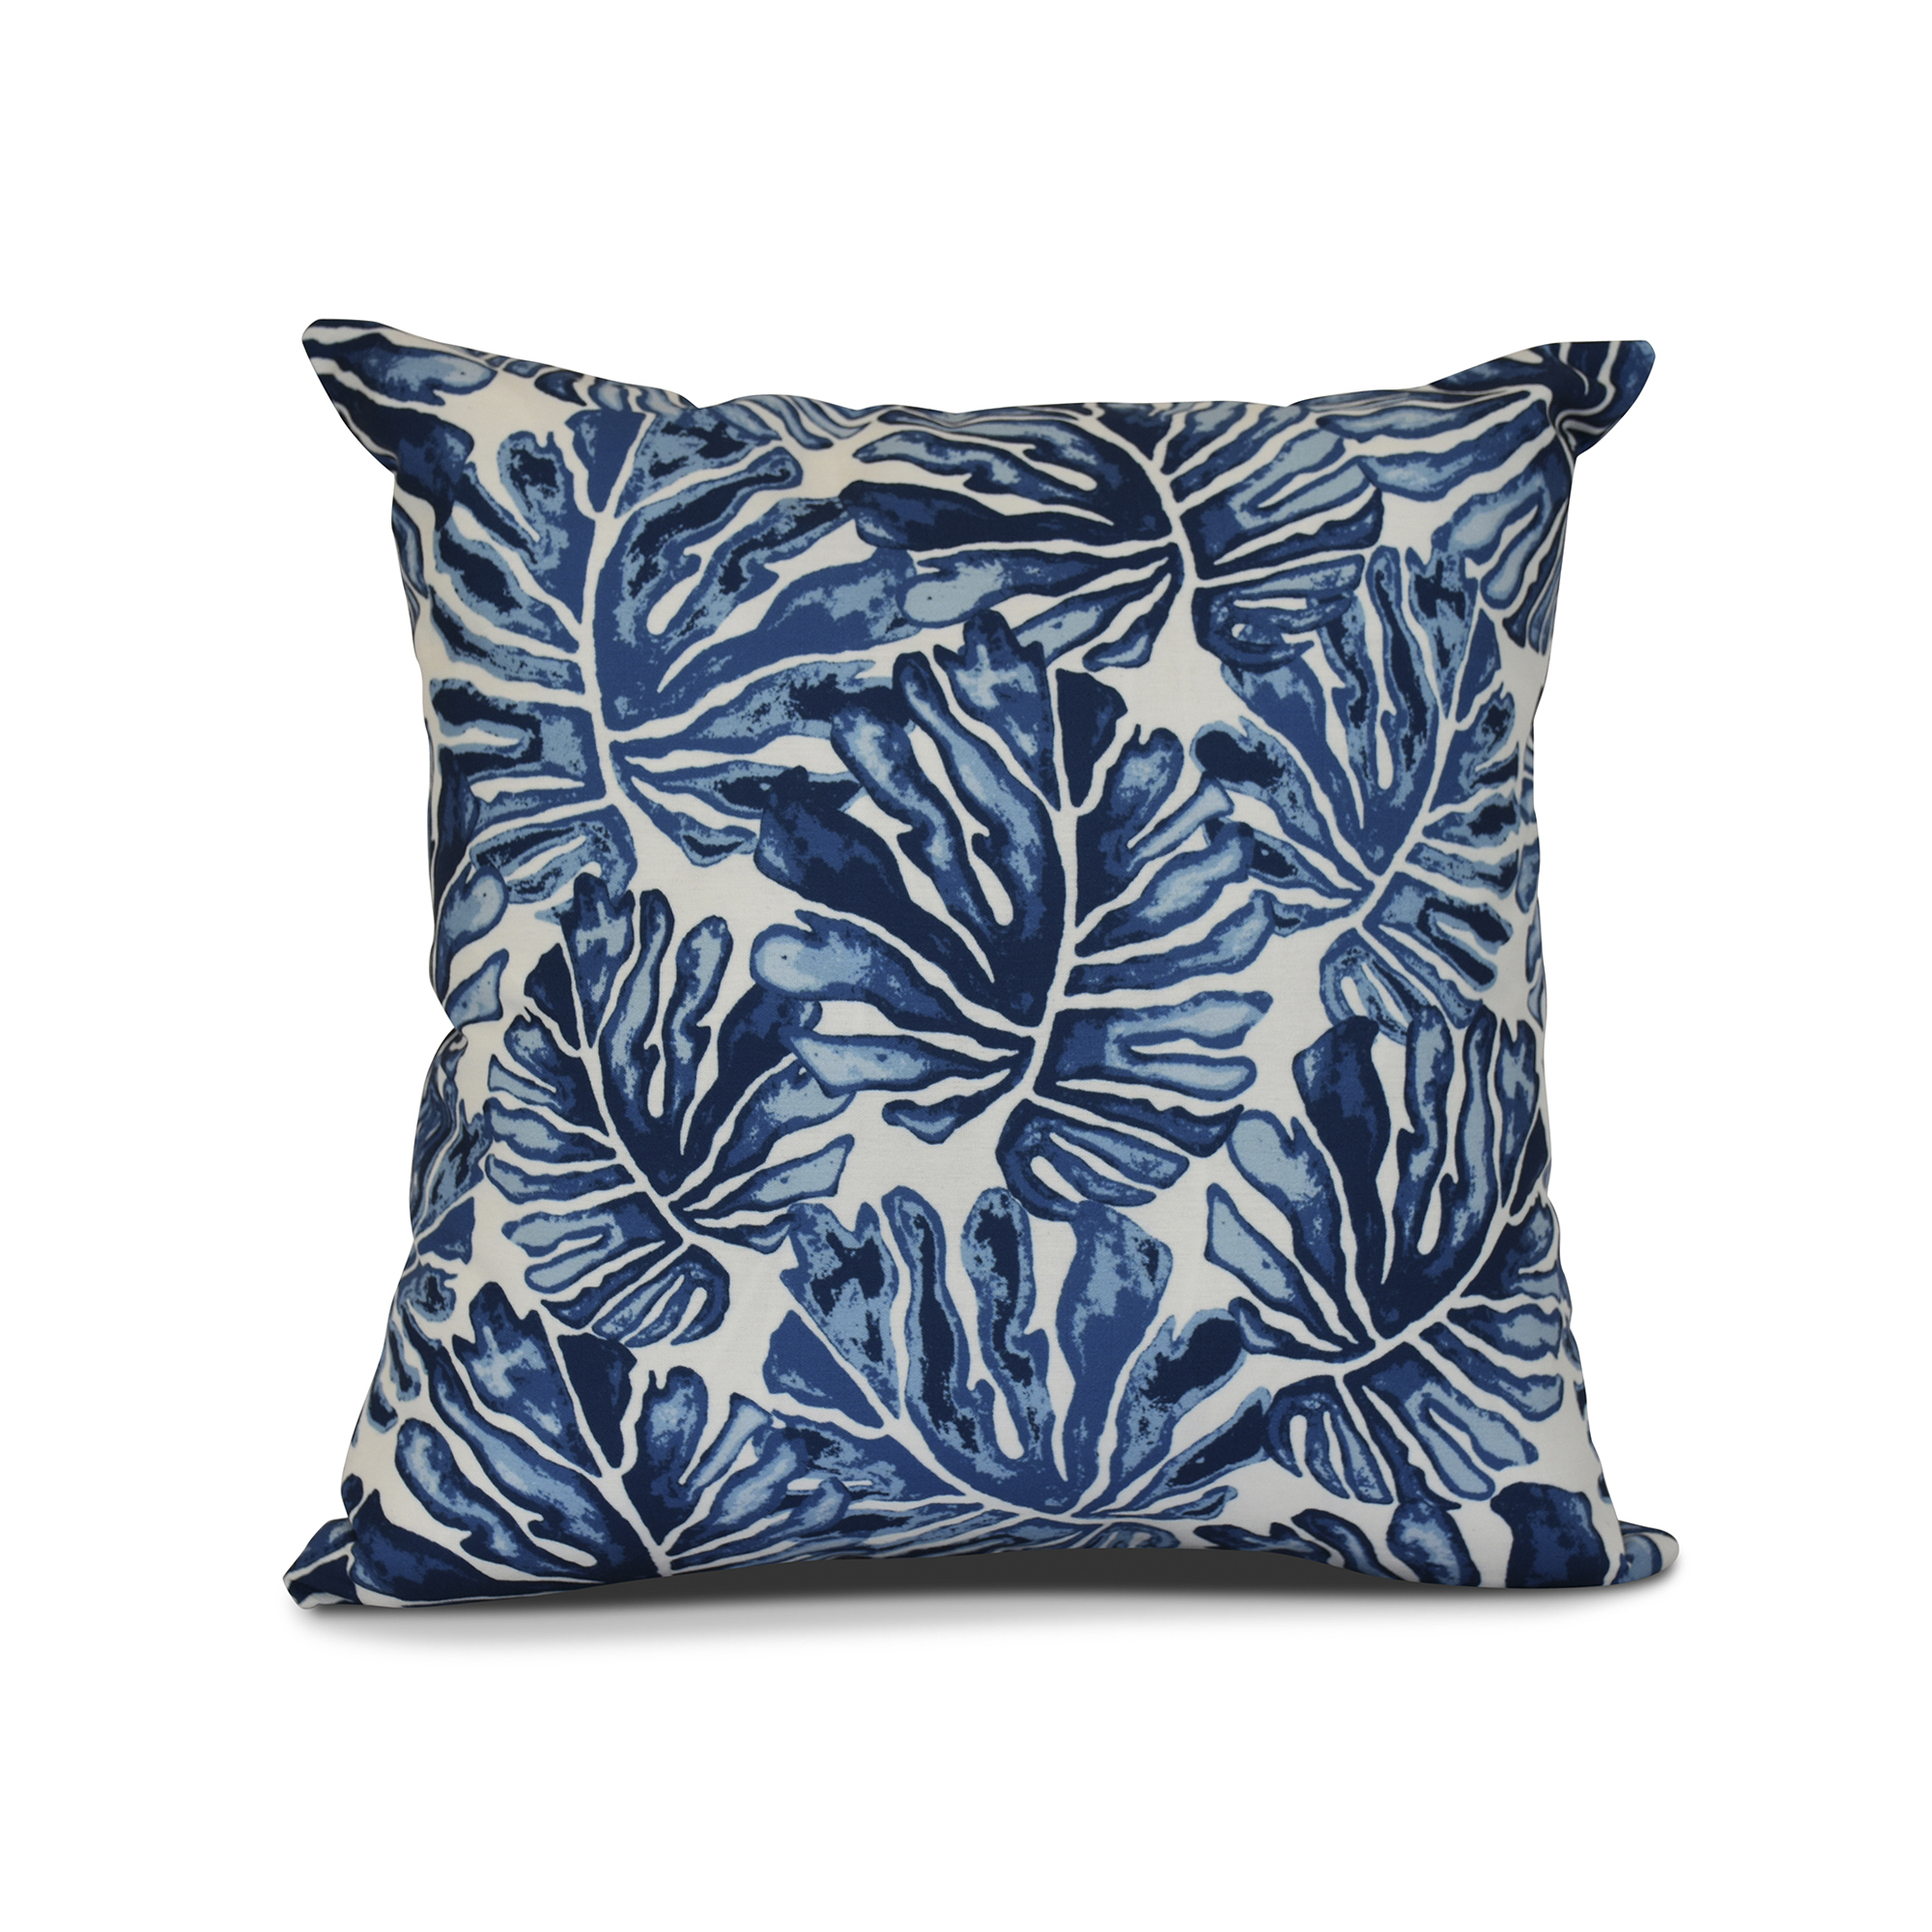 Contemporary Home Living 18" Blue Throw Pillow with Palm Leaves Design - Down Alternative Filler